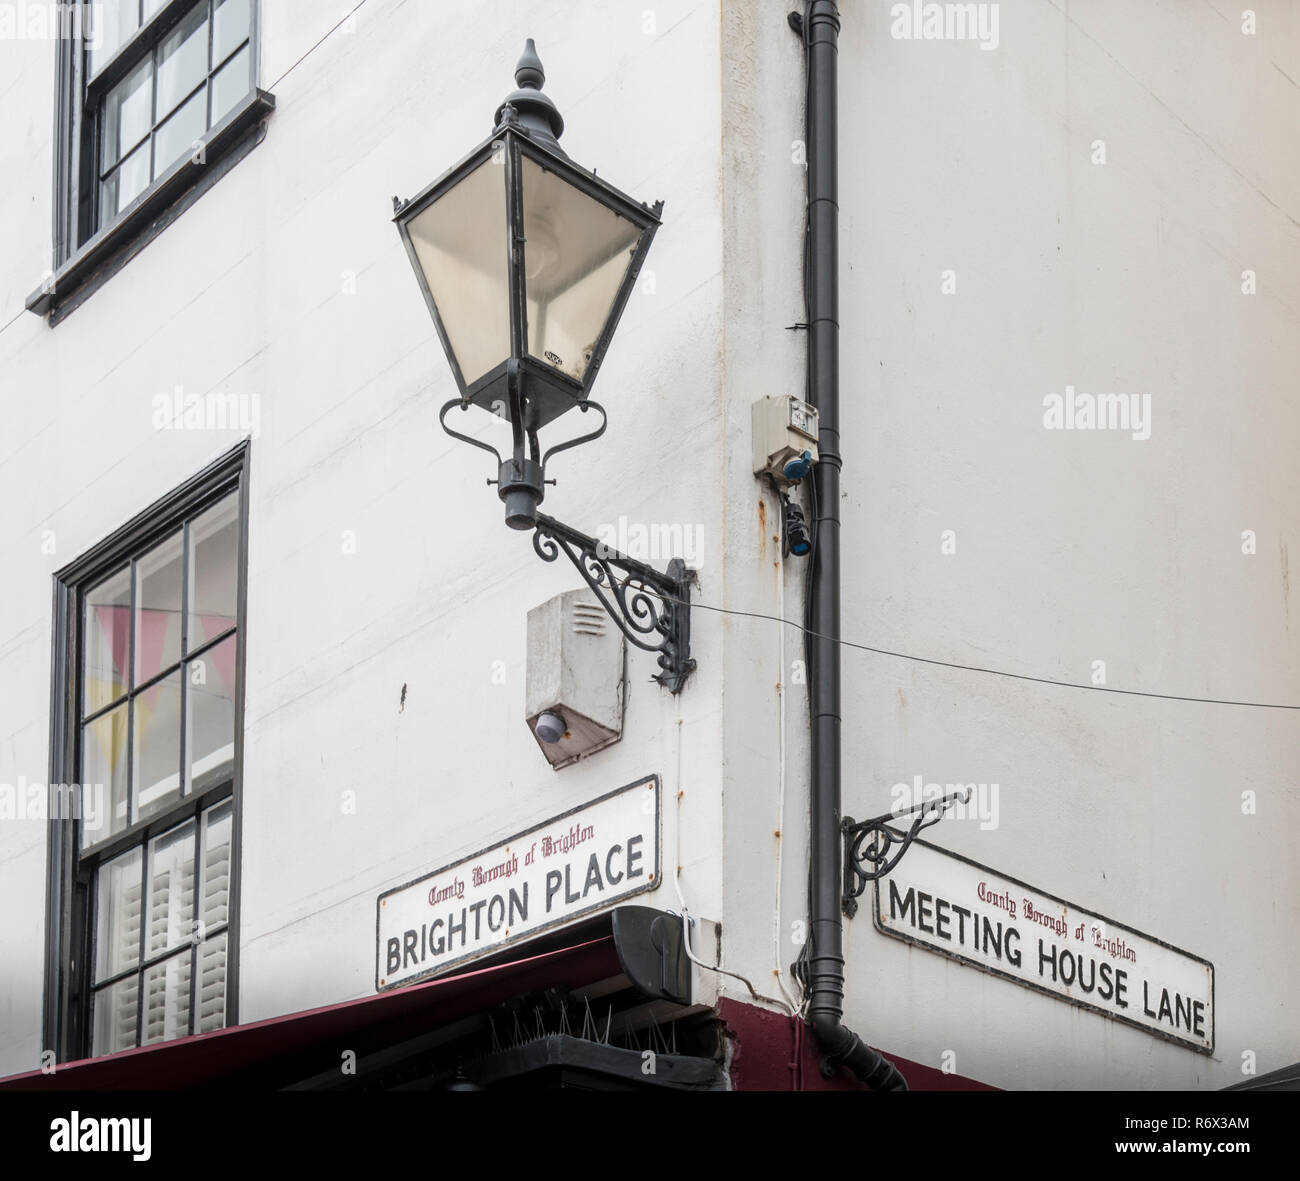 Street name signs on the corner of Brighton Place and Meeting House Lane in the historic town of Brighton, East Sussex, UK Stock Photo